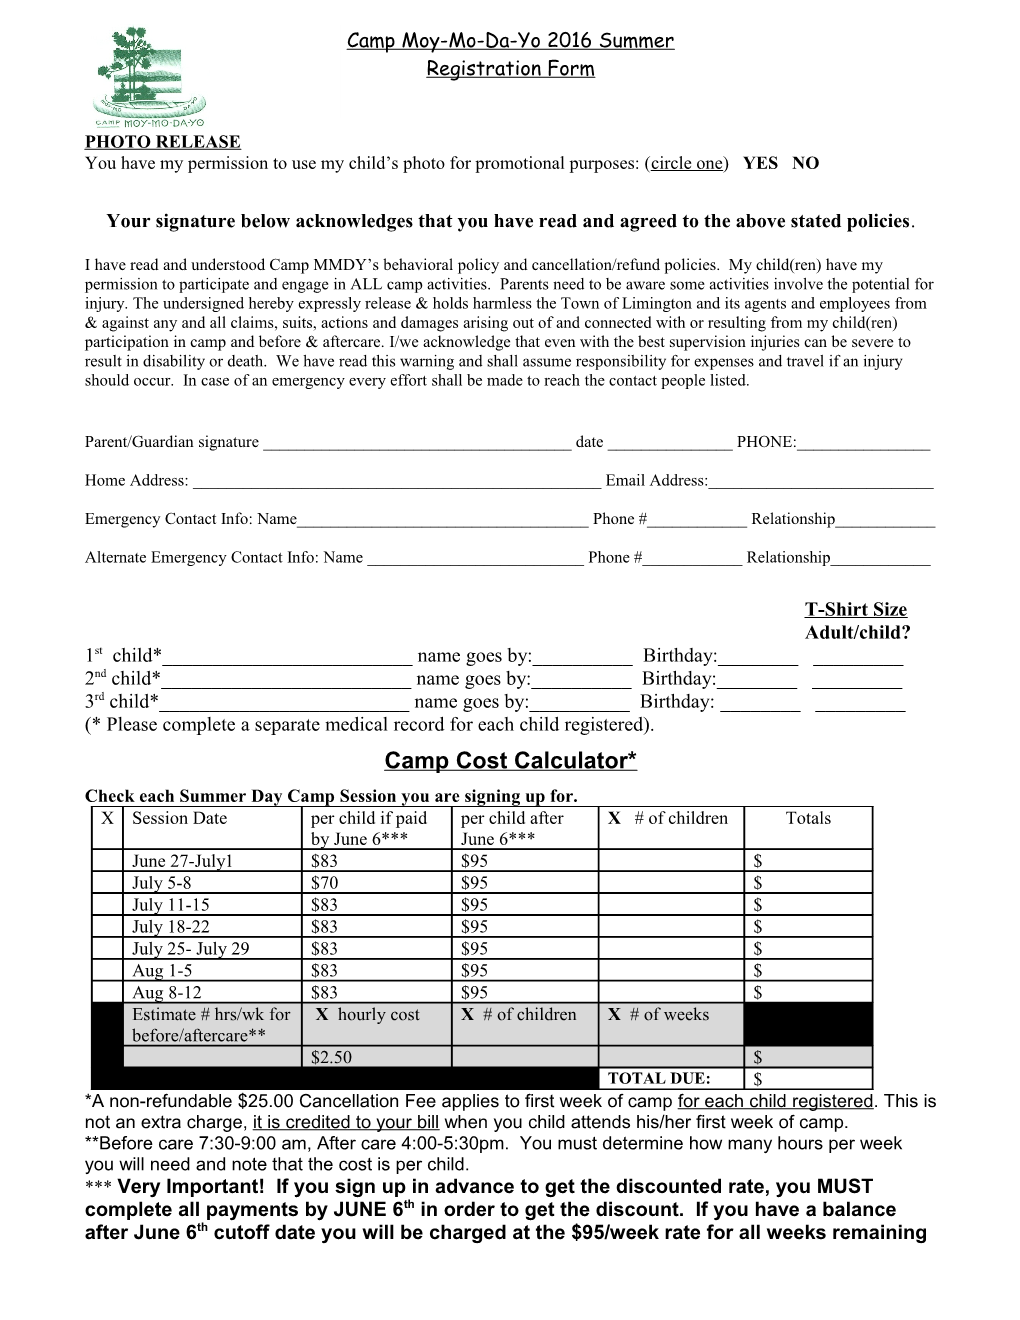 Cost of Camp/Discount Policy